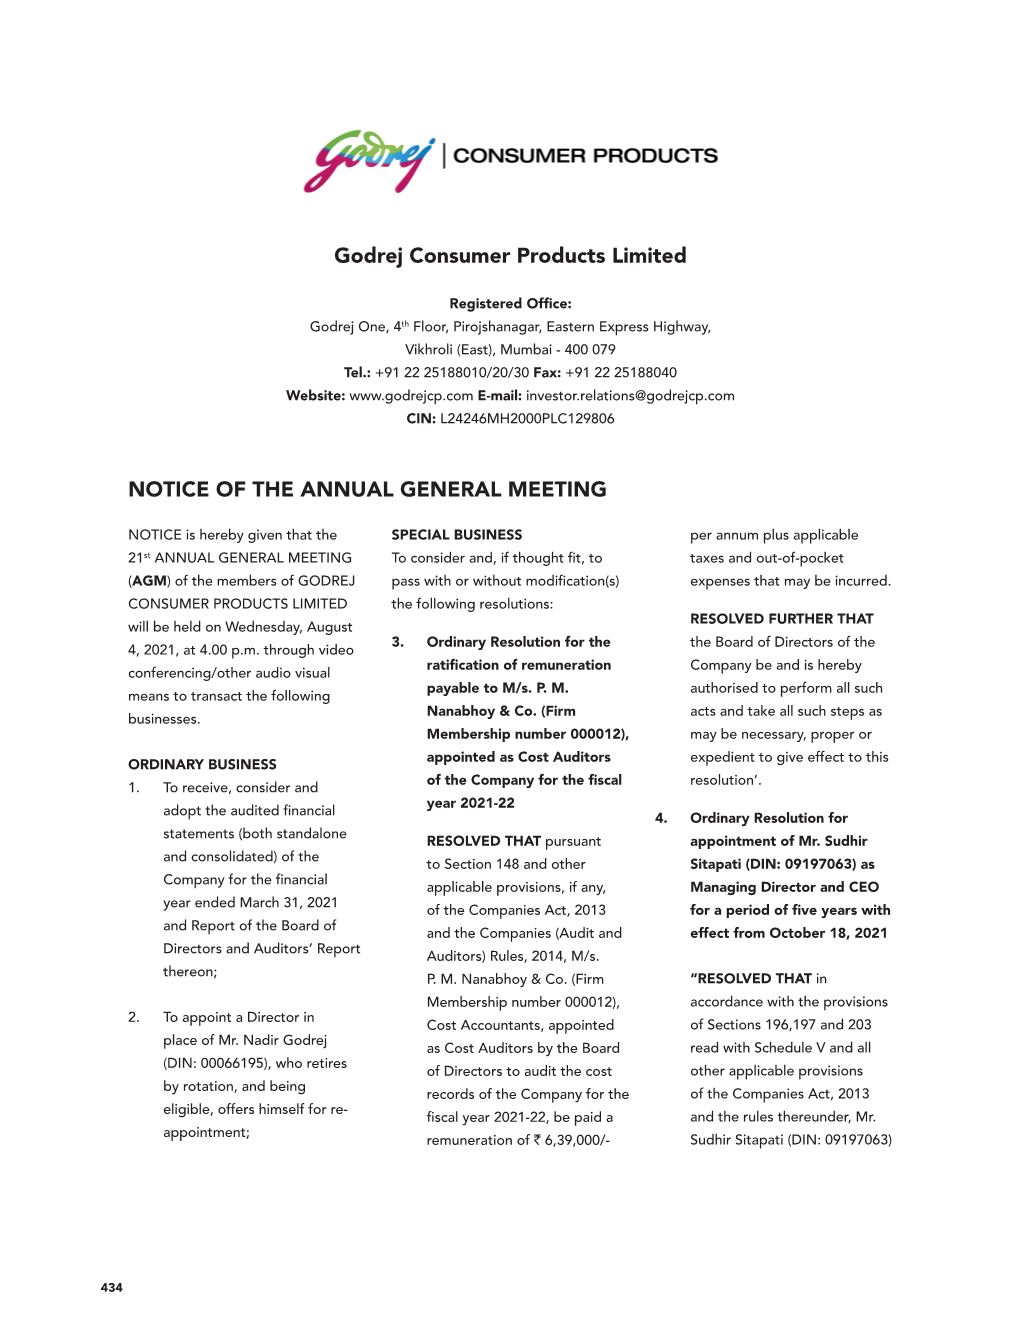 Notice of the Annual General Meeting